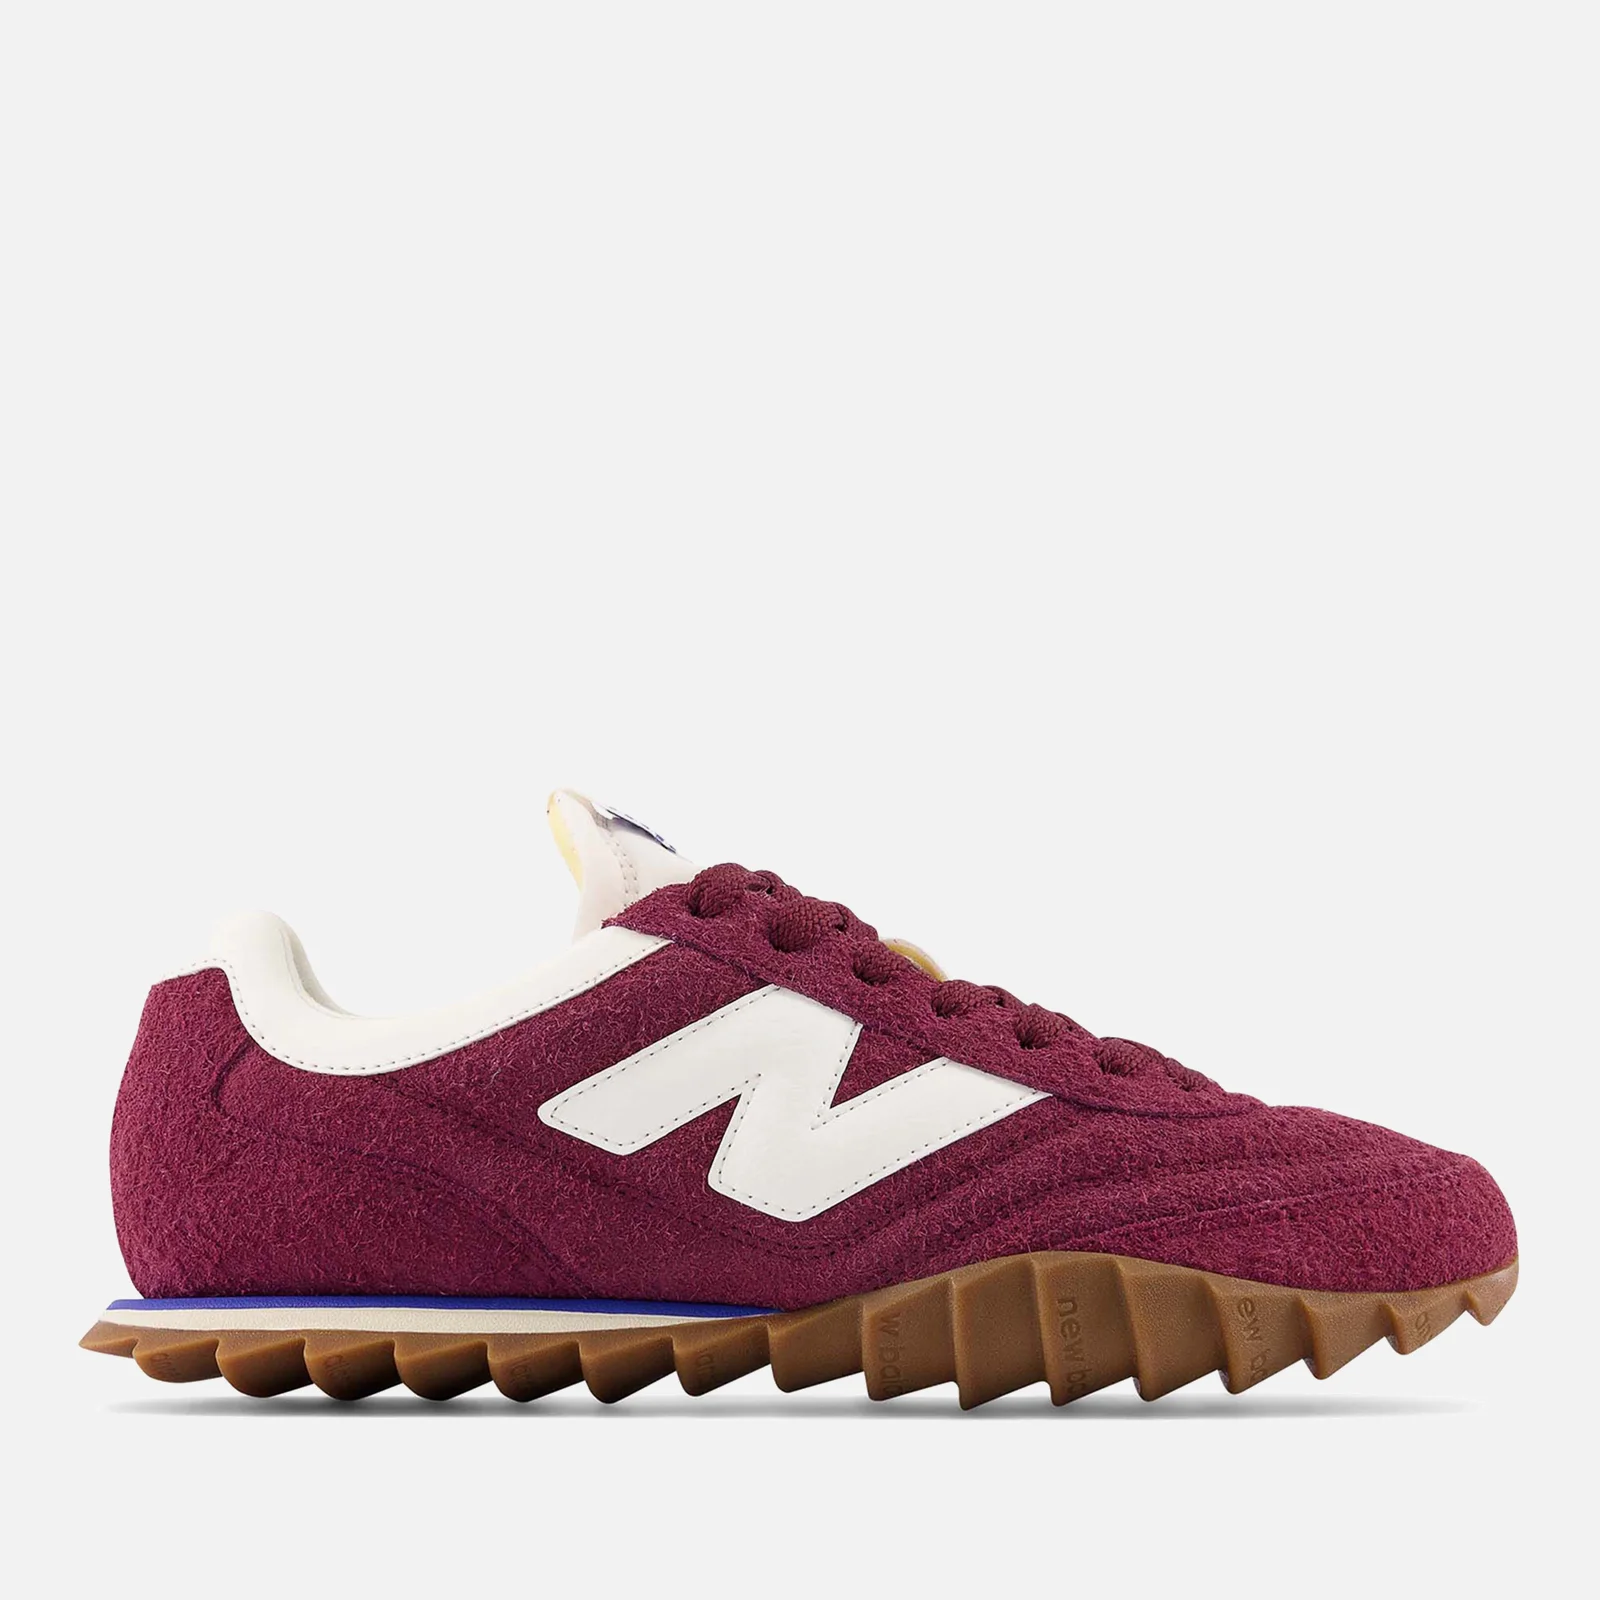 New Balance Men's RC30 Classic Suede Trainers Image 1